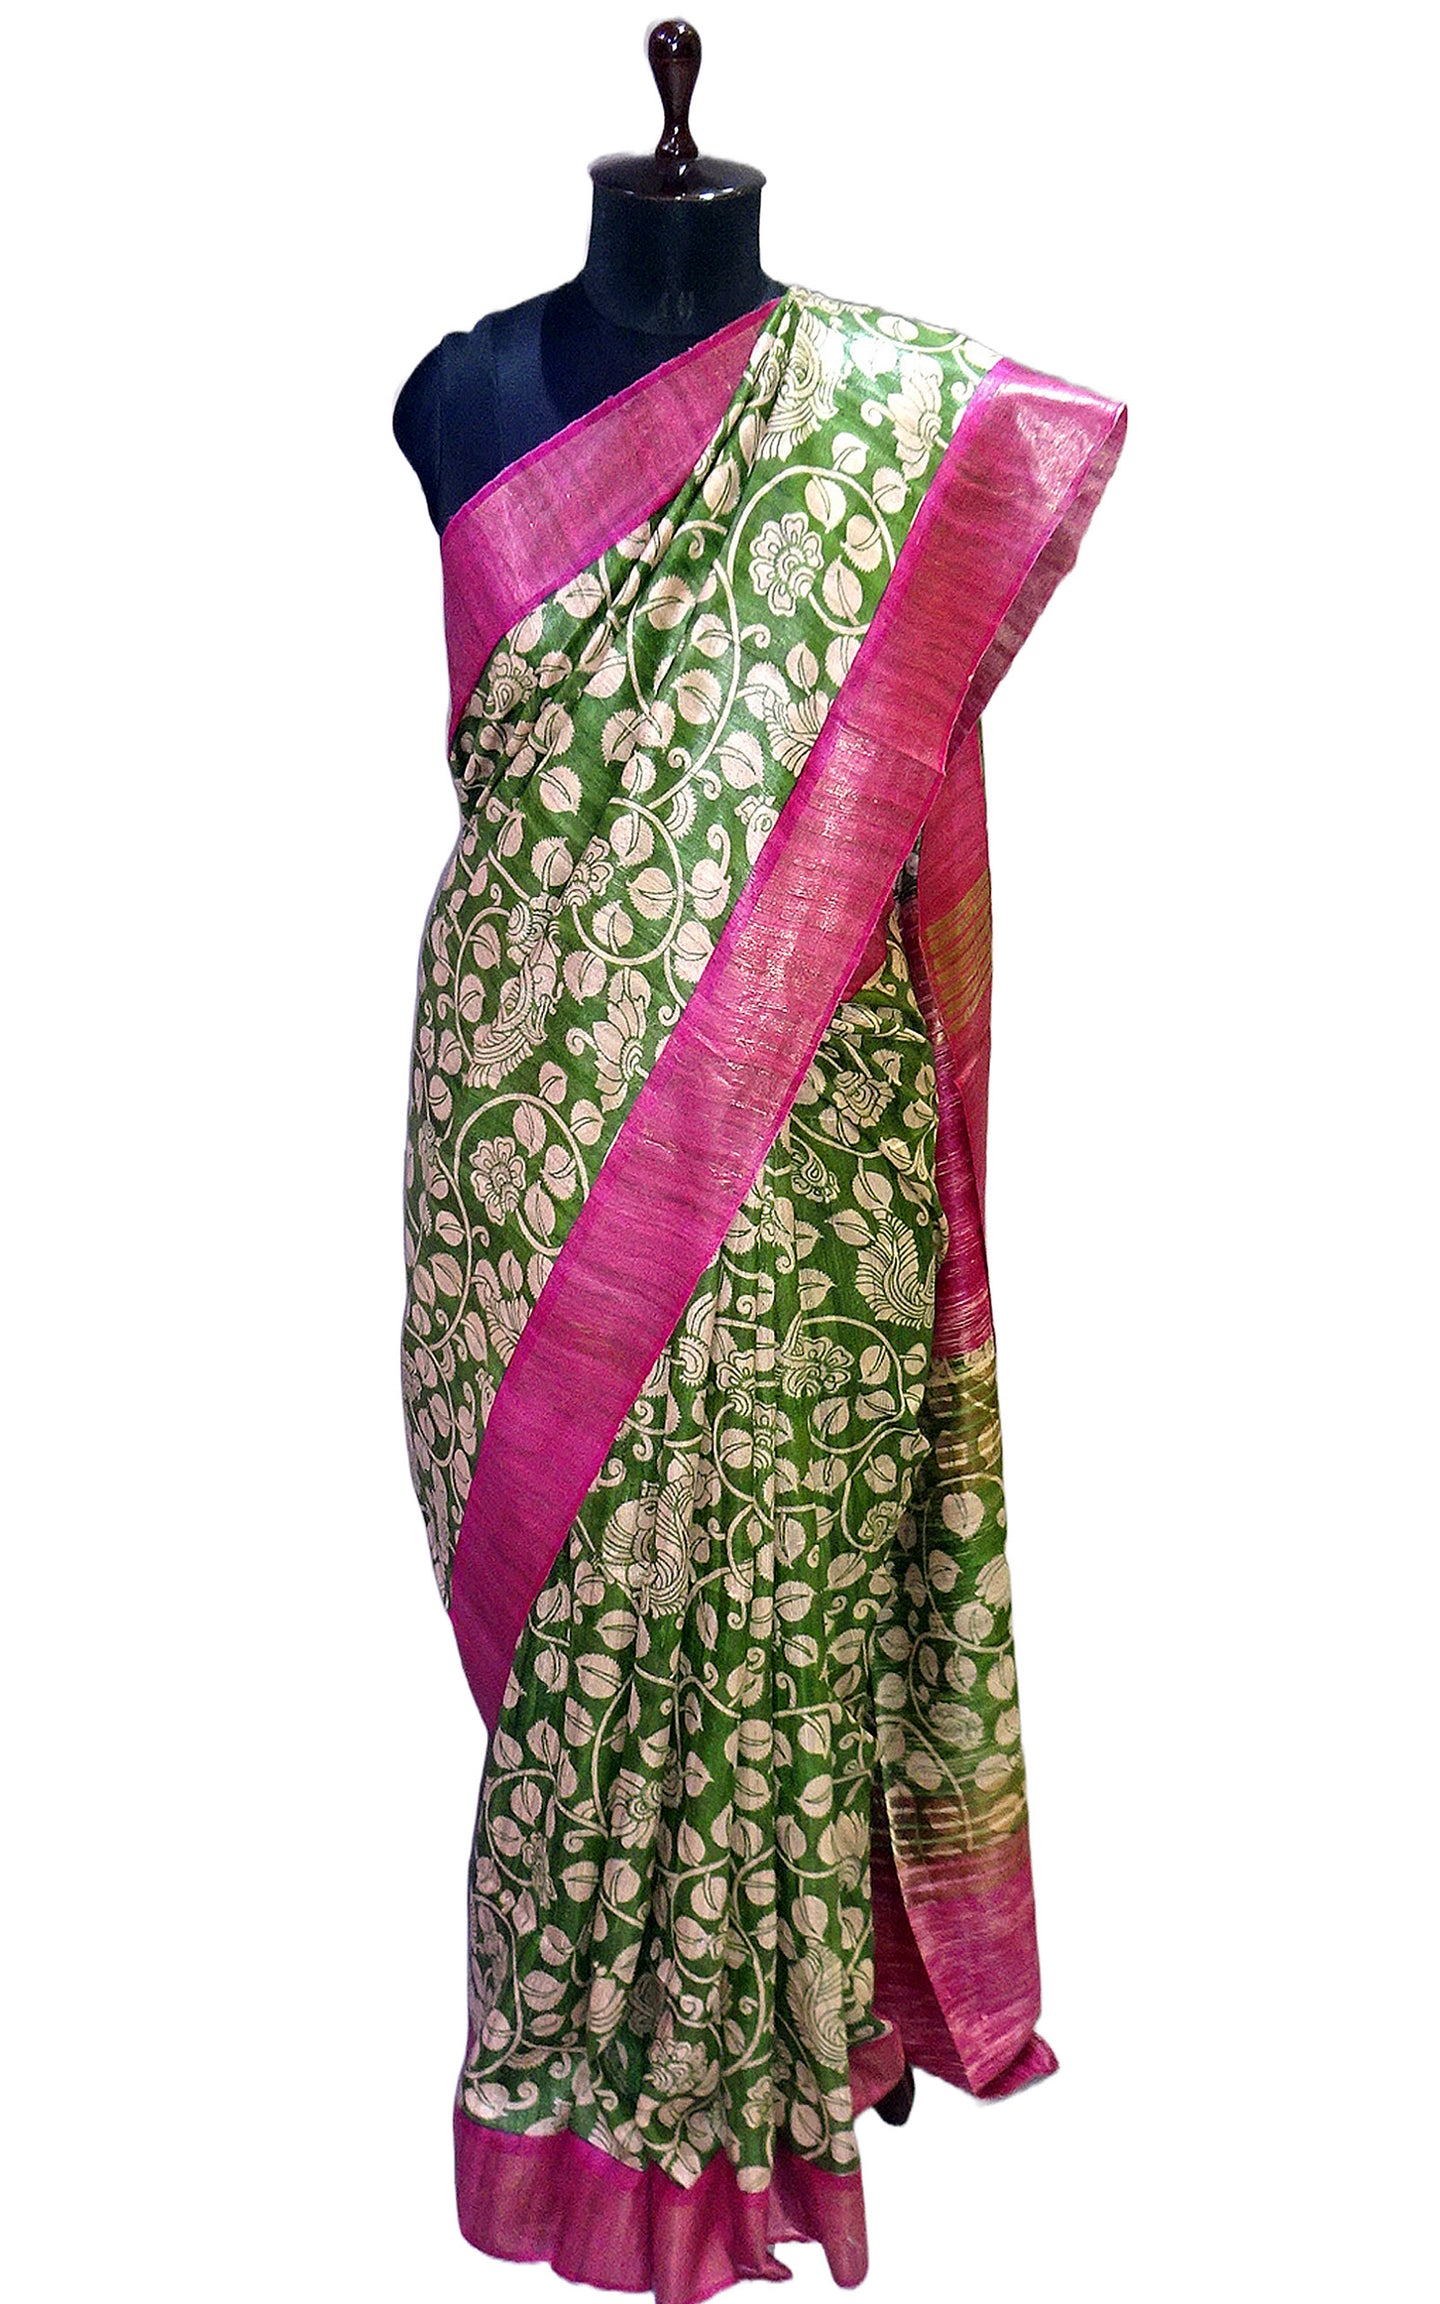 Silk Mark Certified Pure Gigha Block Printed Saree in Pistachio Green, Beige and Hot Pink